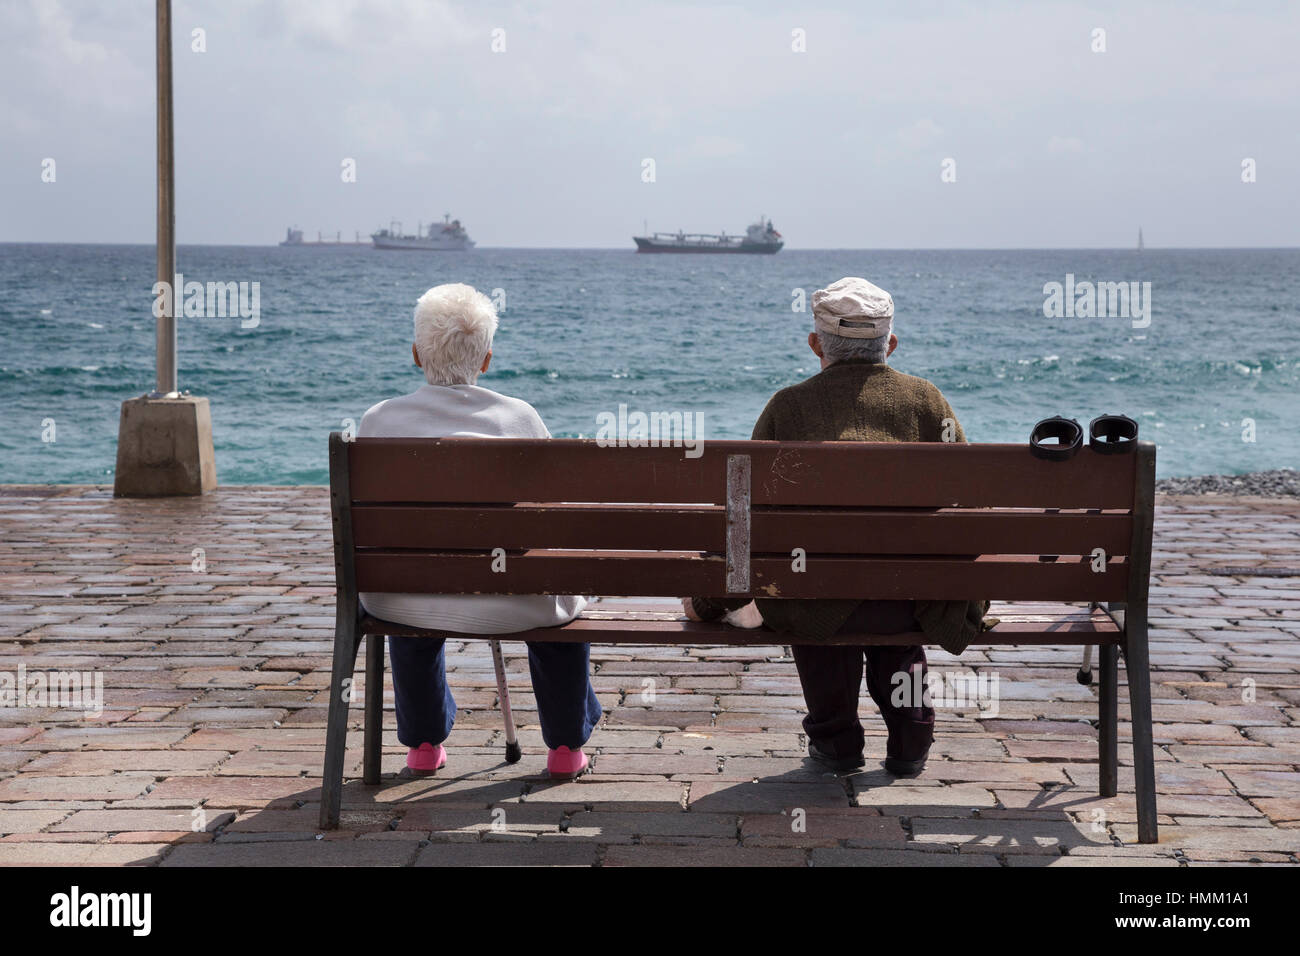 Elderly couple sitting on a bench watching ships on the ocean in San Cristobal, Gran Canaria (Canary Islands), Spain Stock Photo